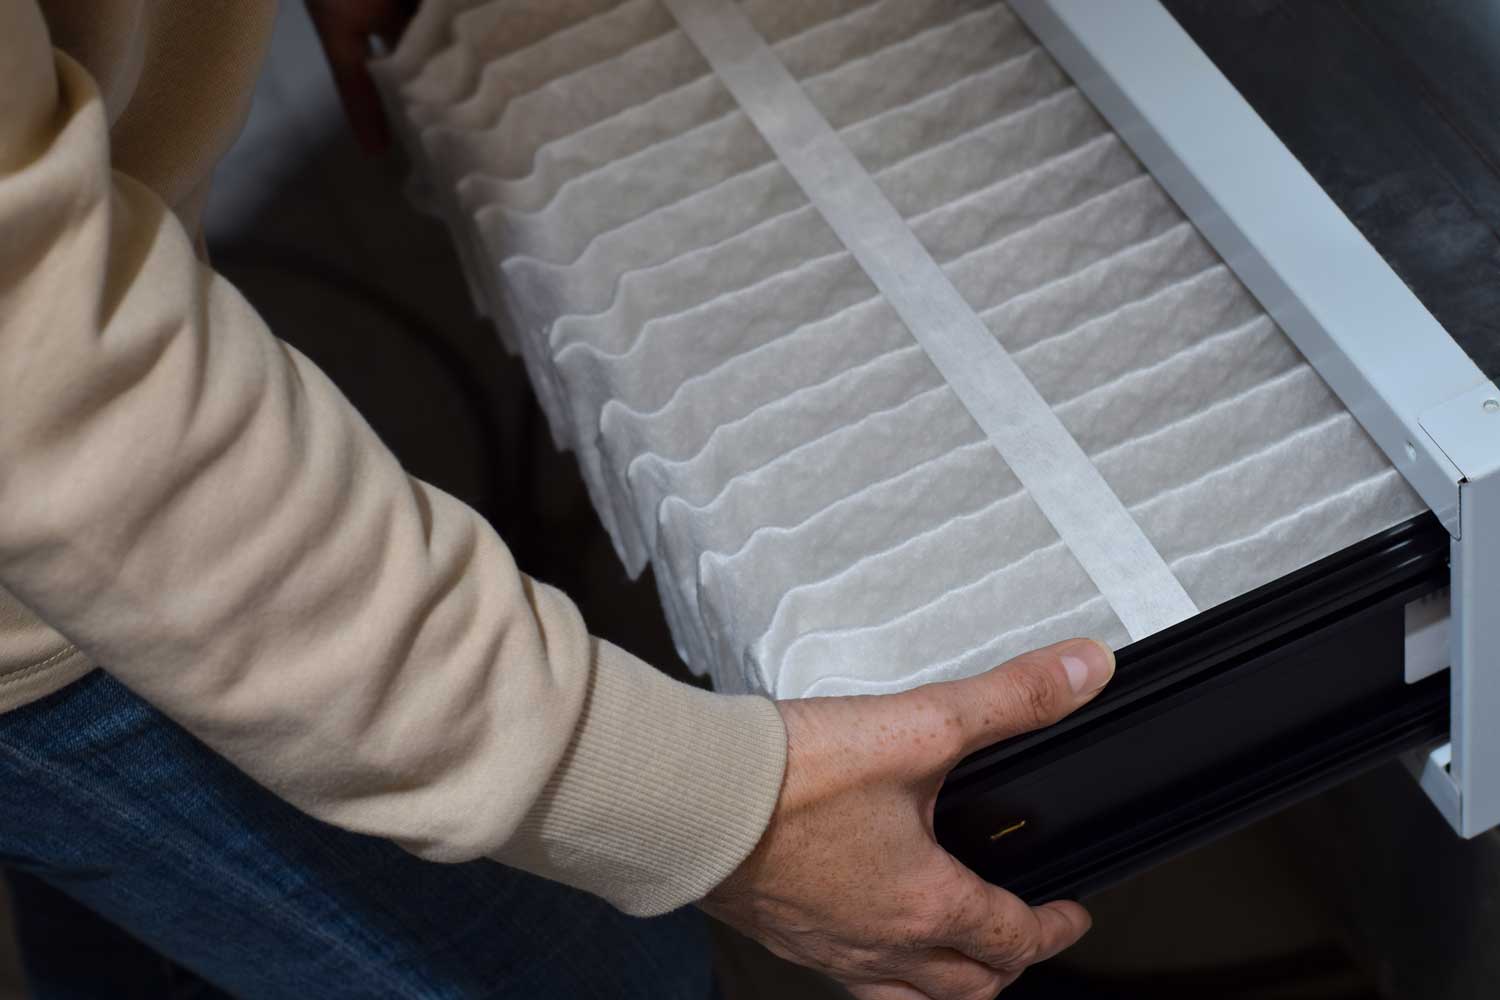 close up of an AC air filter to demonstrate the importance of changing your AC filter regularly